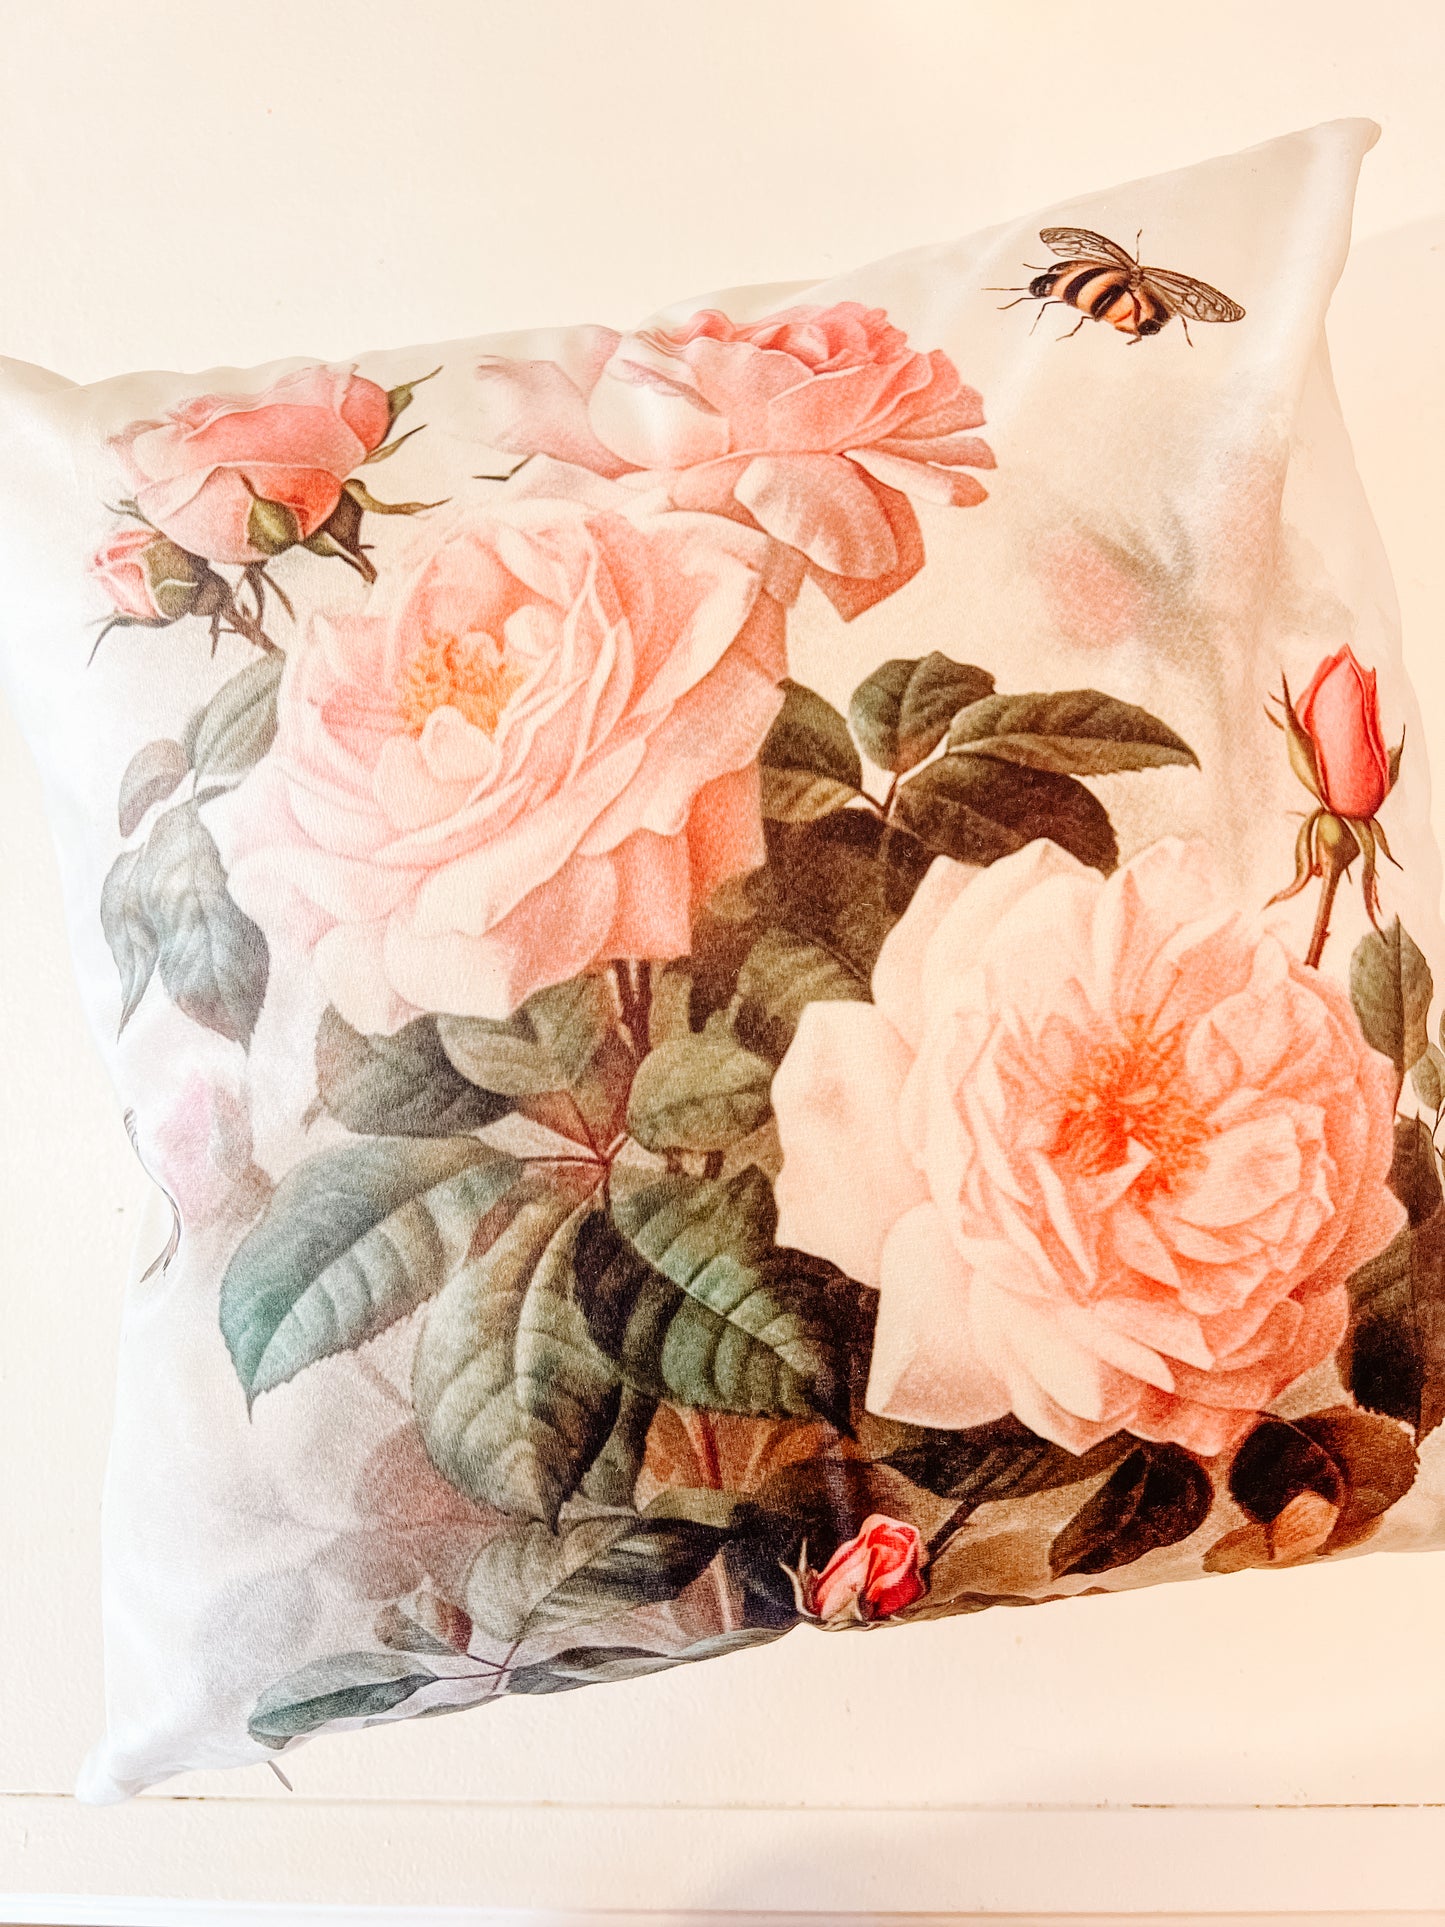 Pink Roses with Bees Pillow